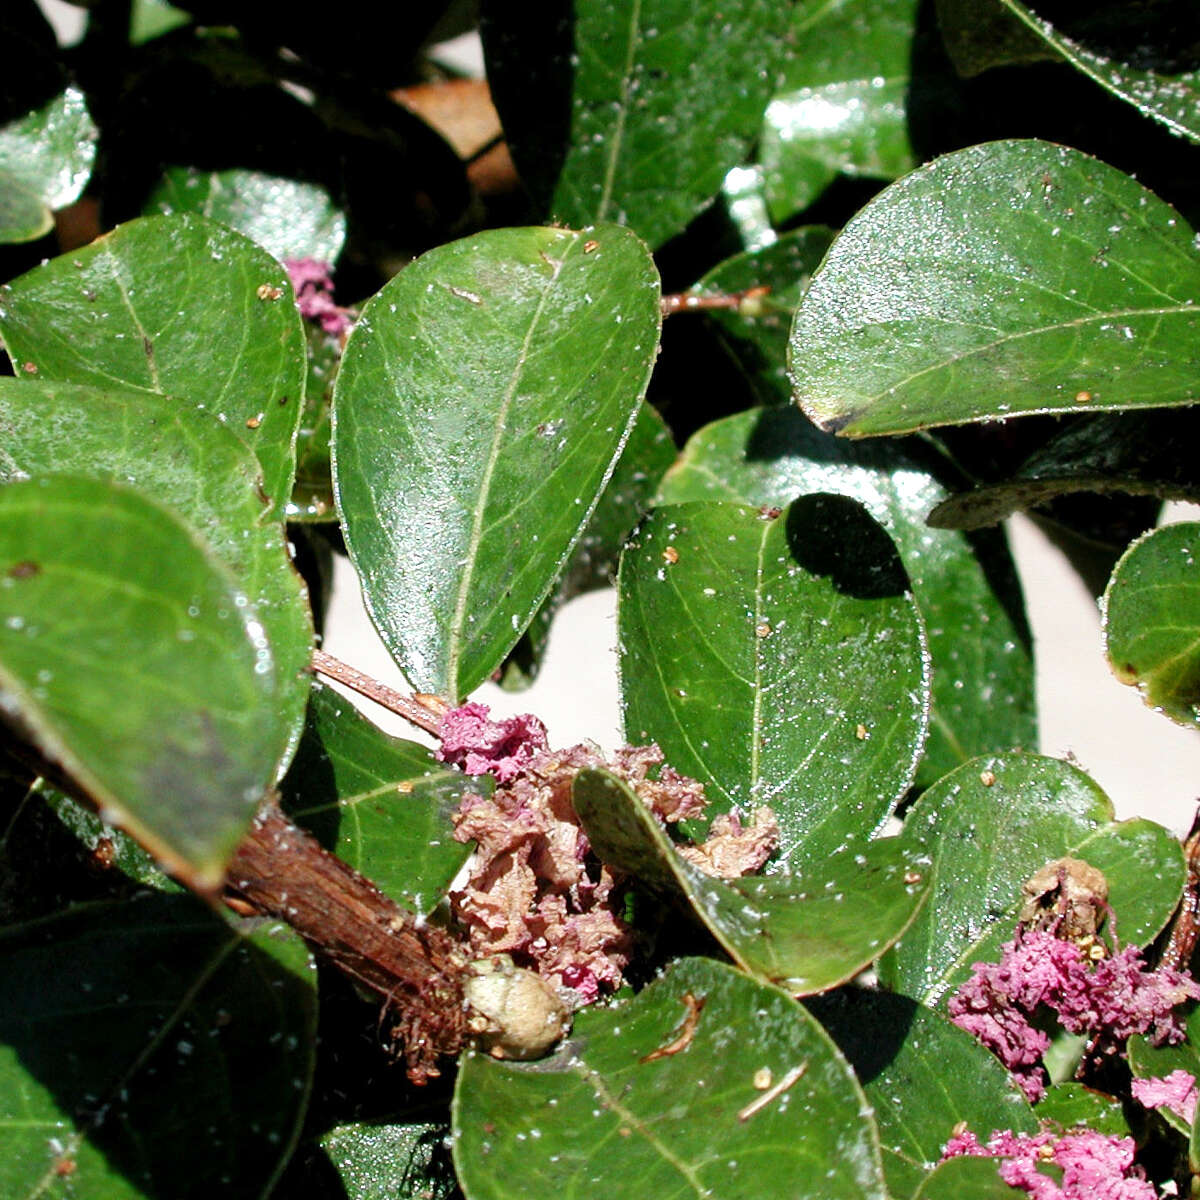 This crape myrtle is covered with aphids.